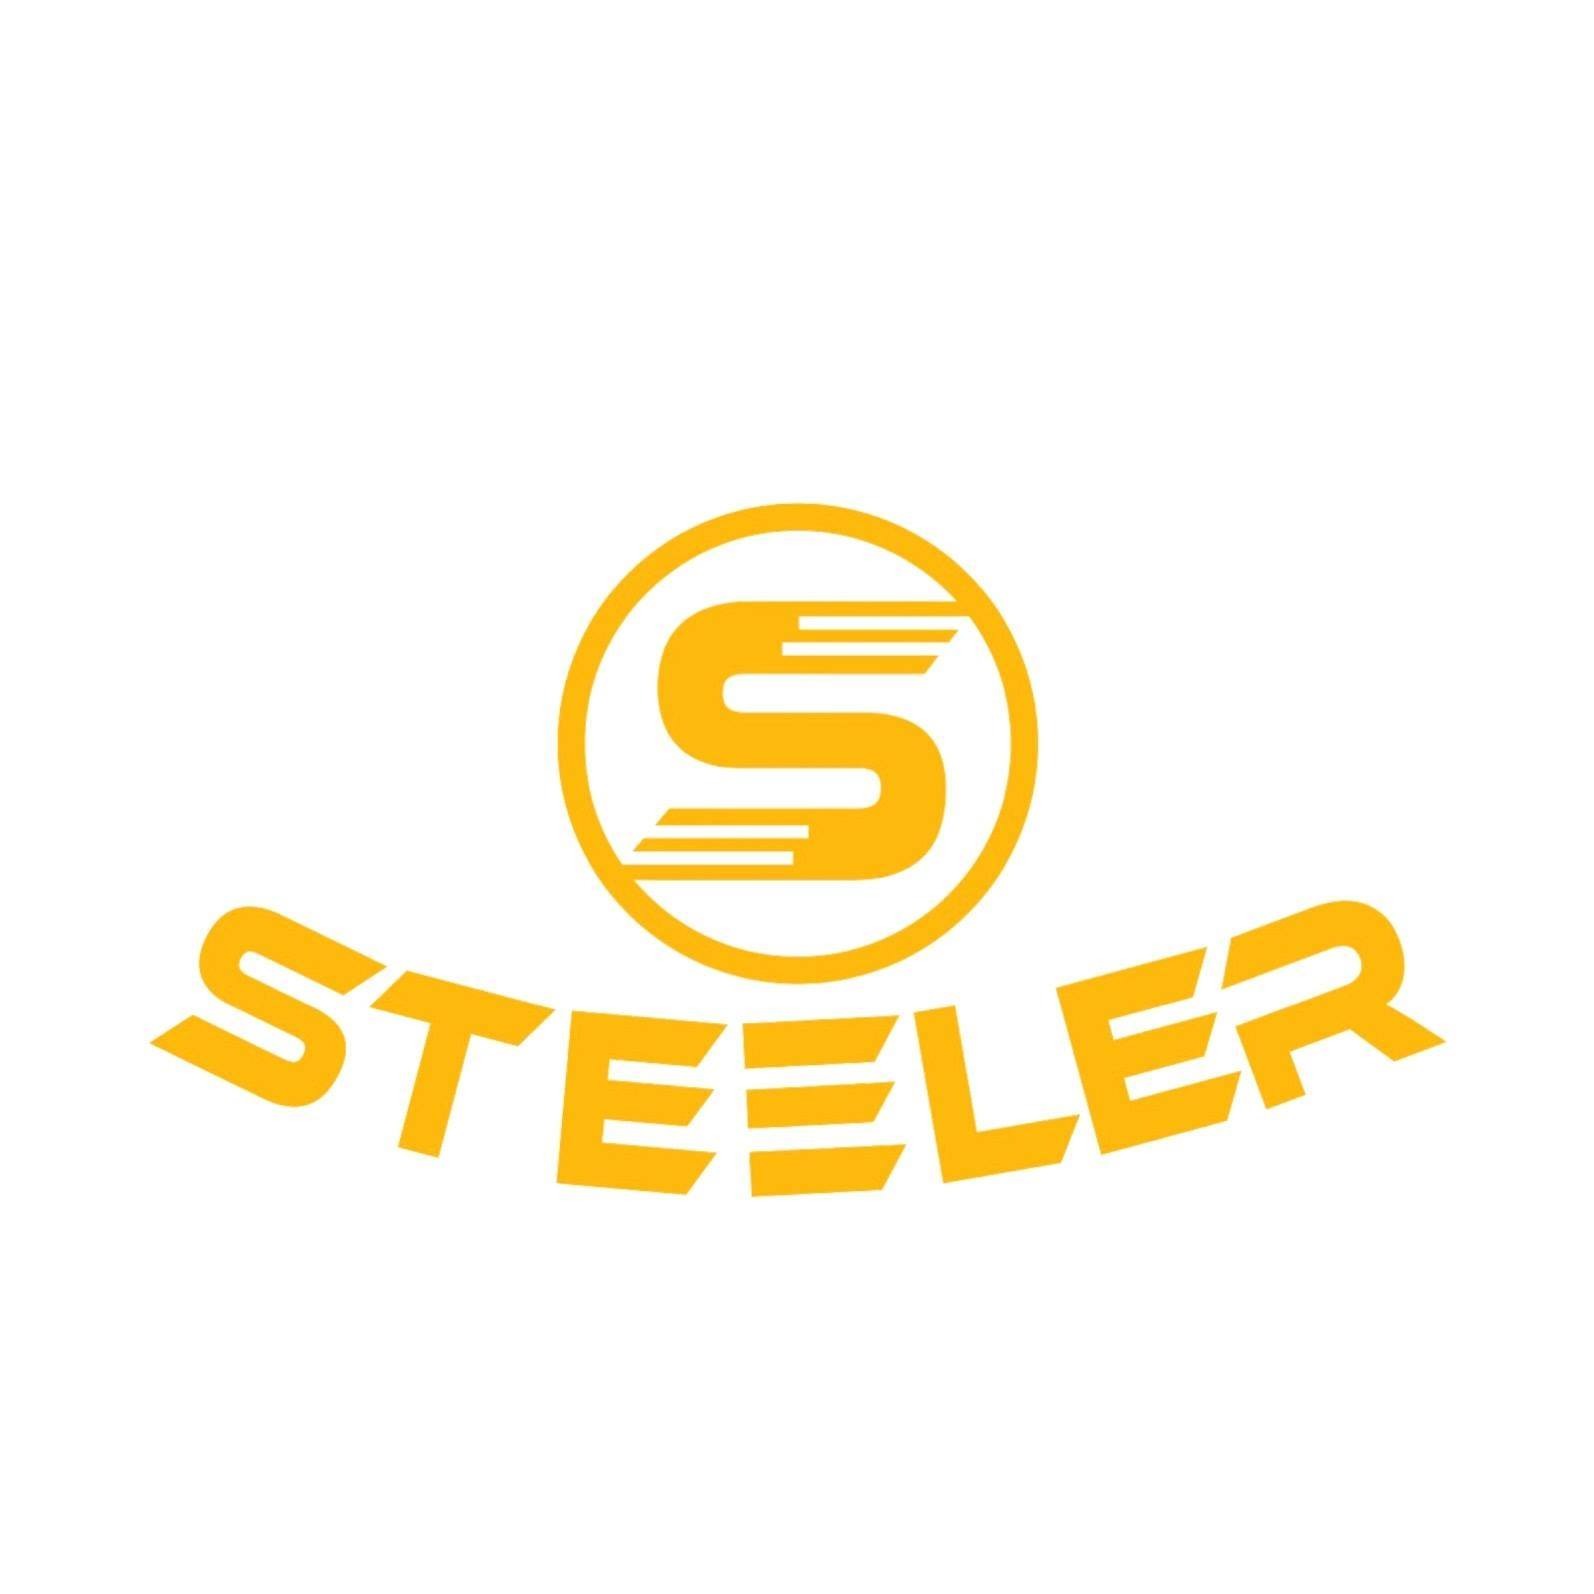 Steeler Shoes